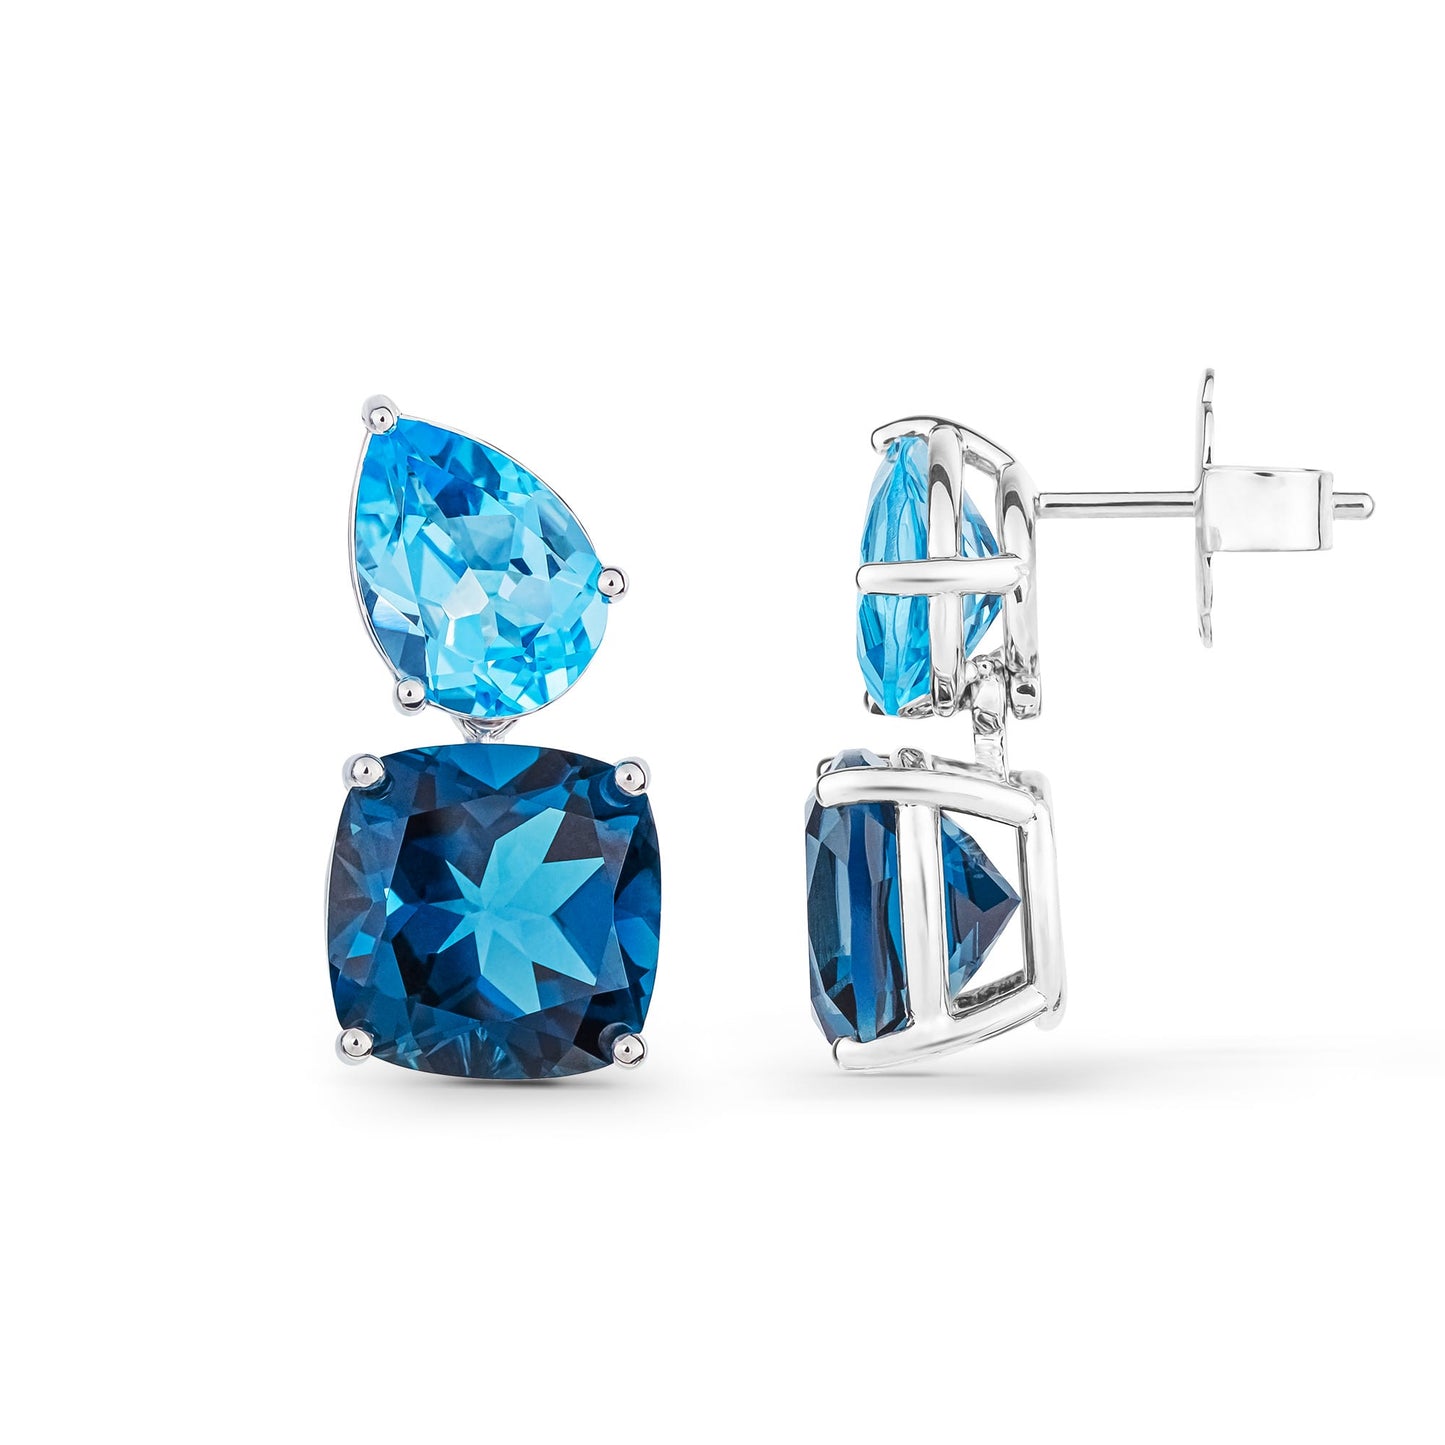 Chaos Earrings in 18ct White Gold with Blue Topaz